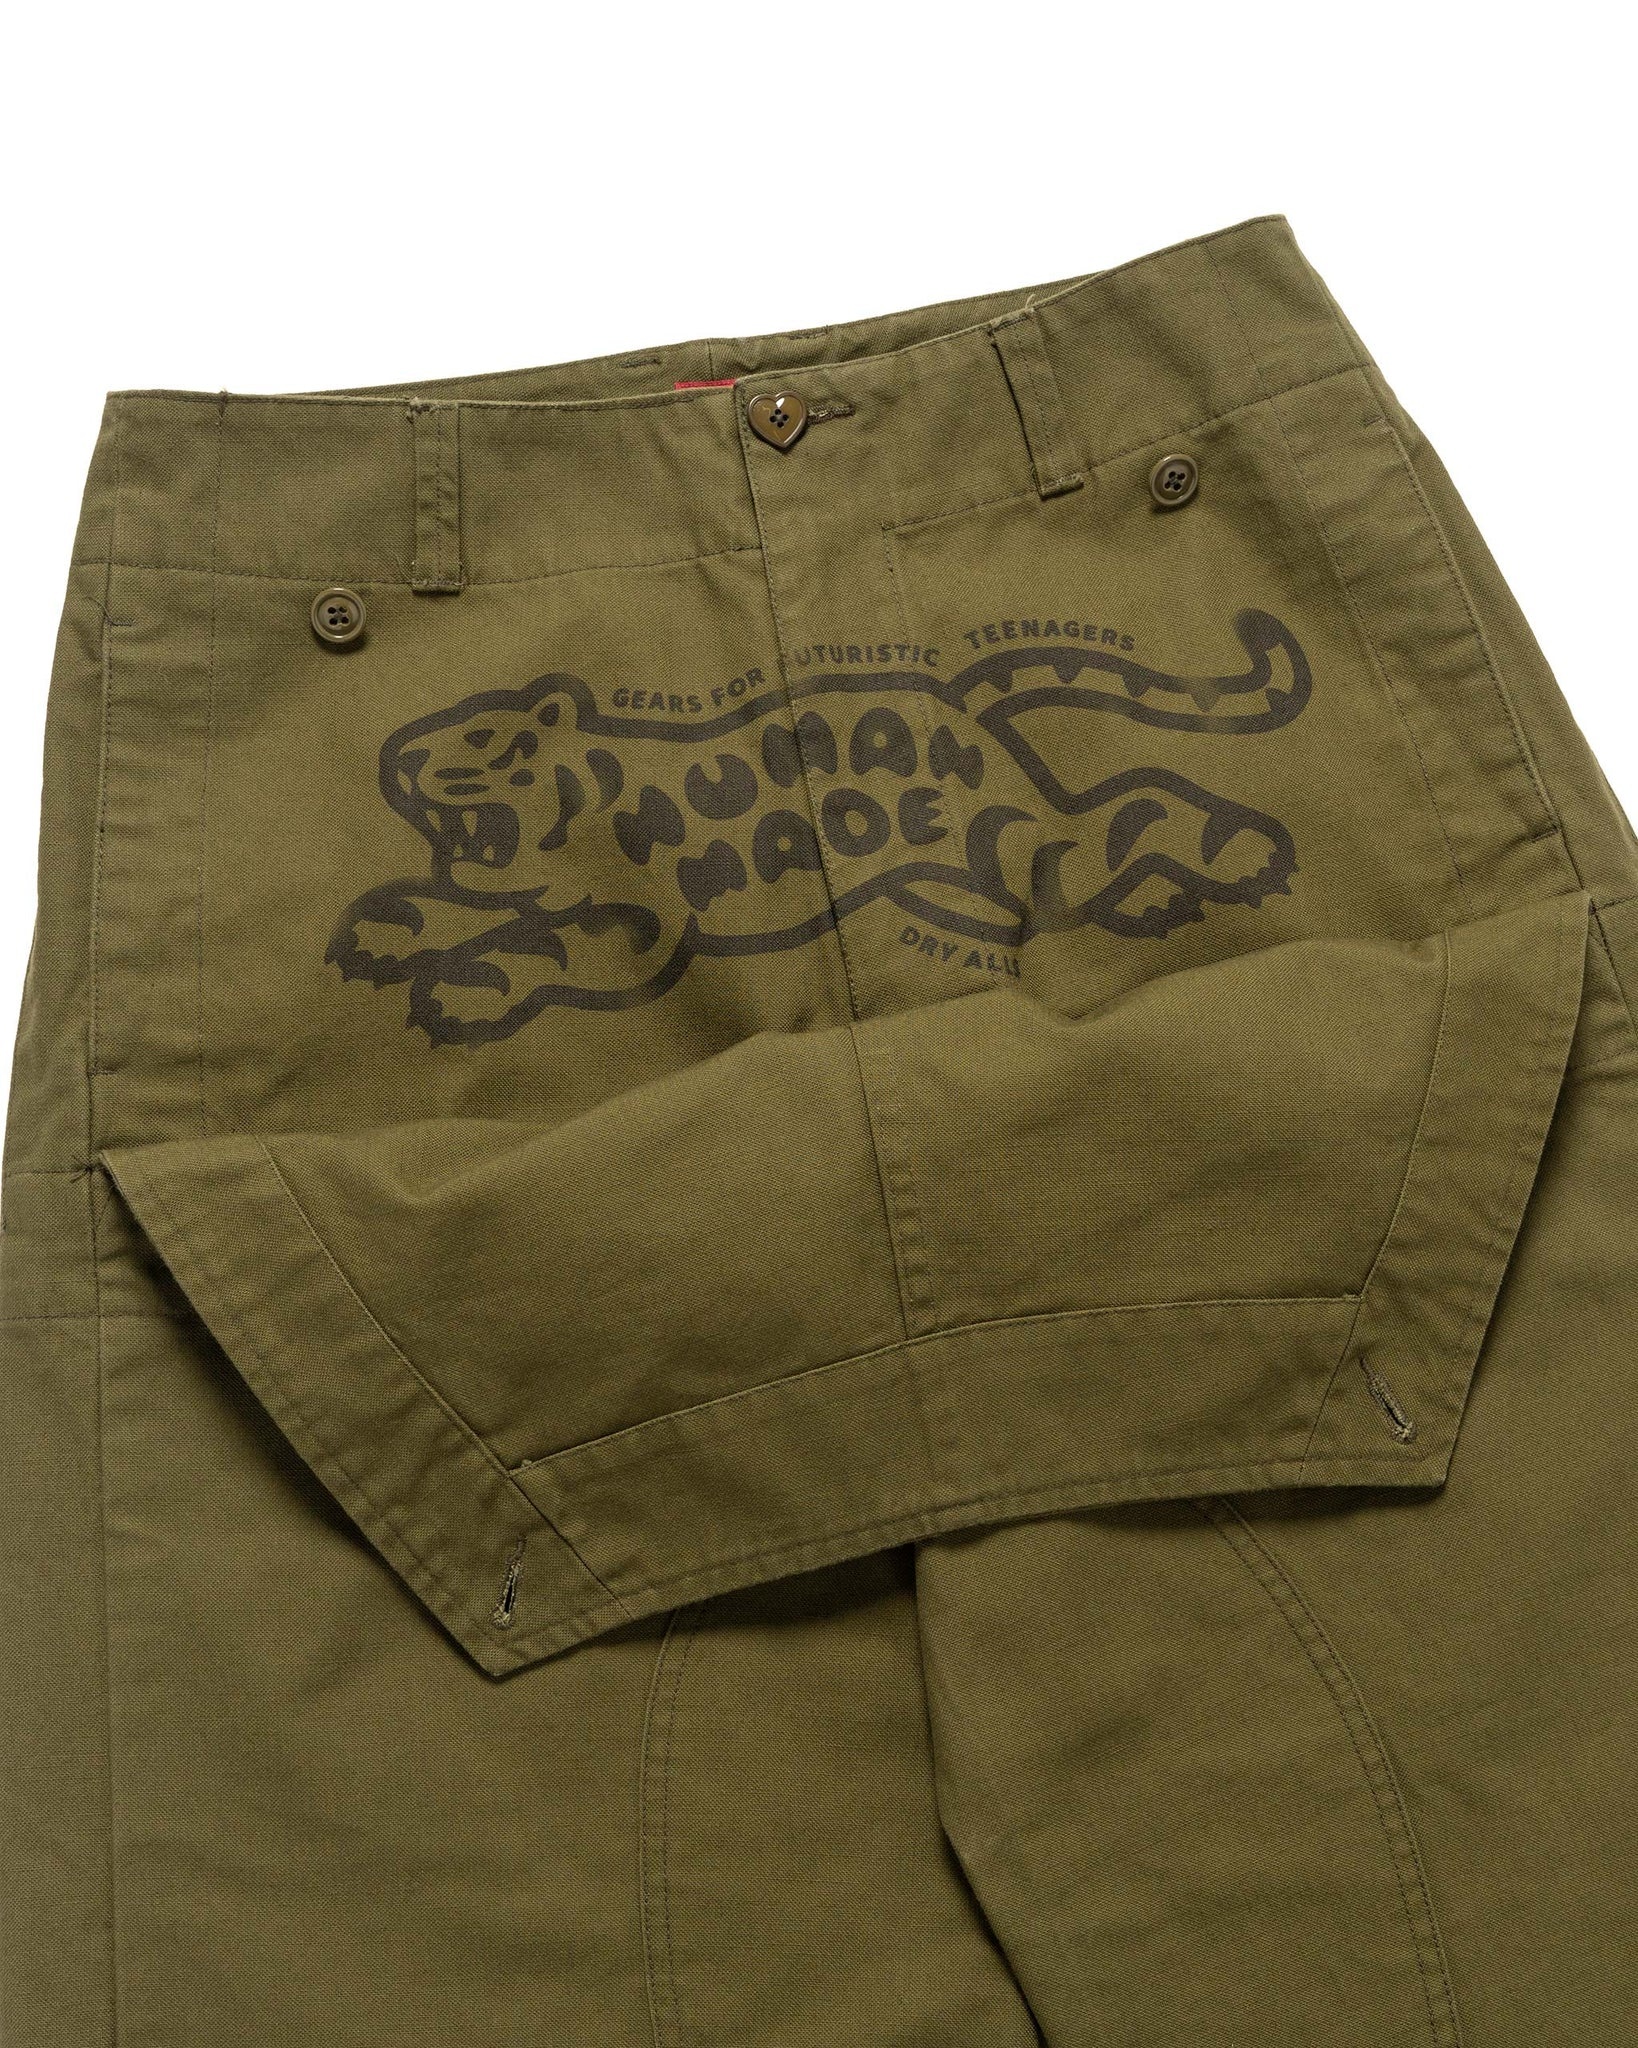 MILITARY MOTORCYCLE PANTS OLIVE DRAB - 6